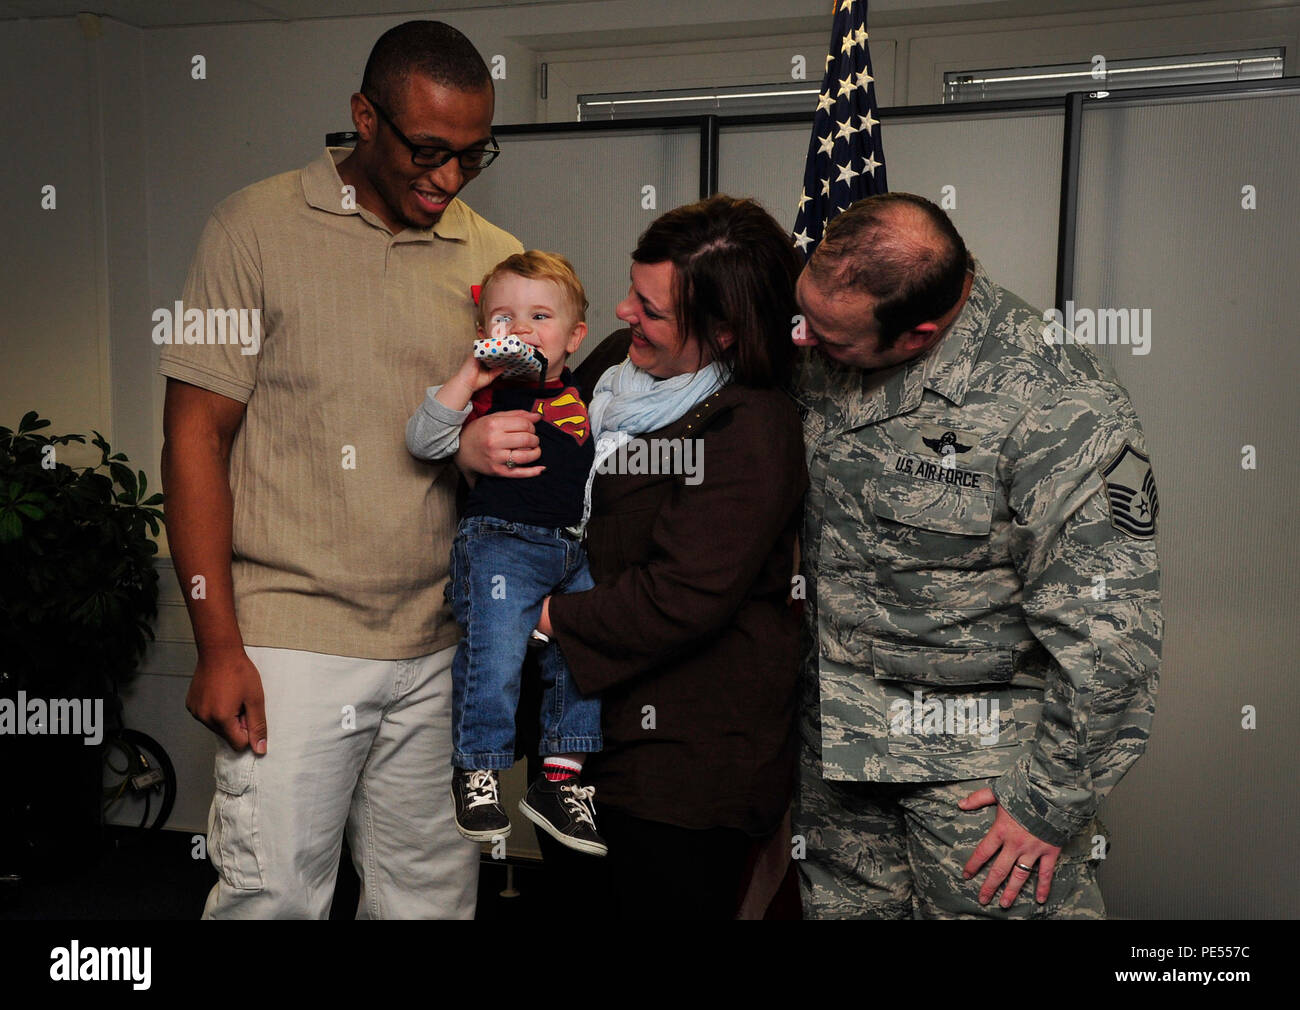 Sean Tatum, 86th Force Support Squadron caregiver, stands with the Dalmo family for photos during a Red Cross Lifesaving Award ceremony Oct. 8, 2015, at Ramstein Air Base, Germany. Tatum utilized his Red Cross health and safety skills to dislodge food from Jackson Dalmo’s throat July 1, 2015. (U.S. Air Force photo/Airman 1st Class Larissa Greatwood) Stock Photo